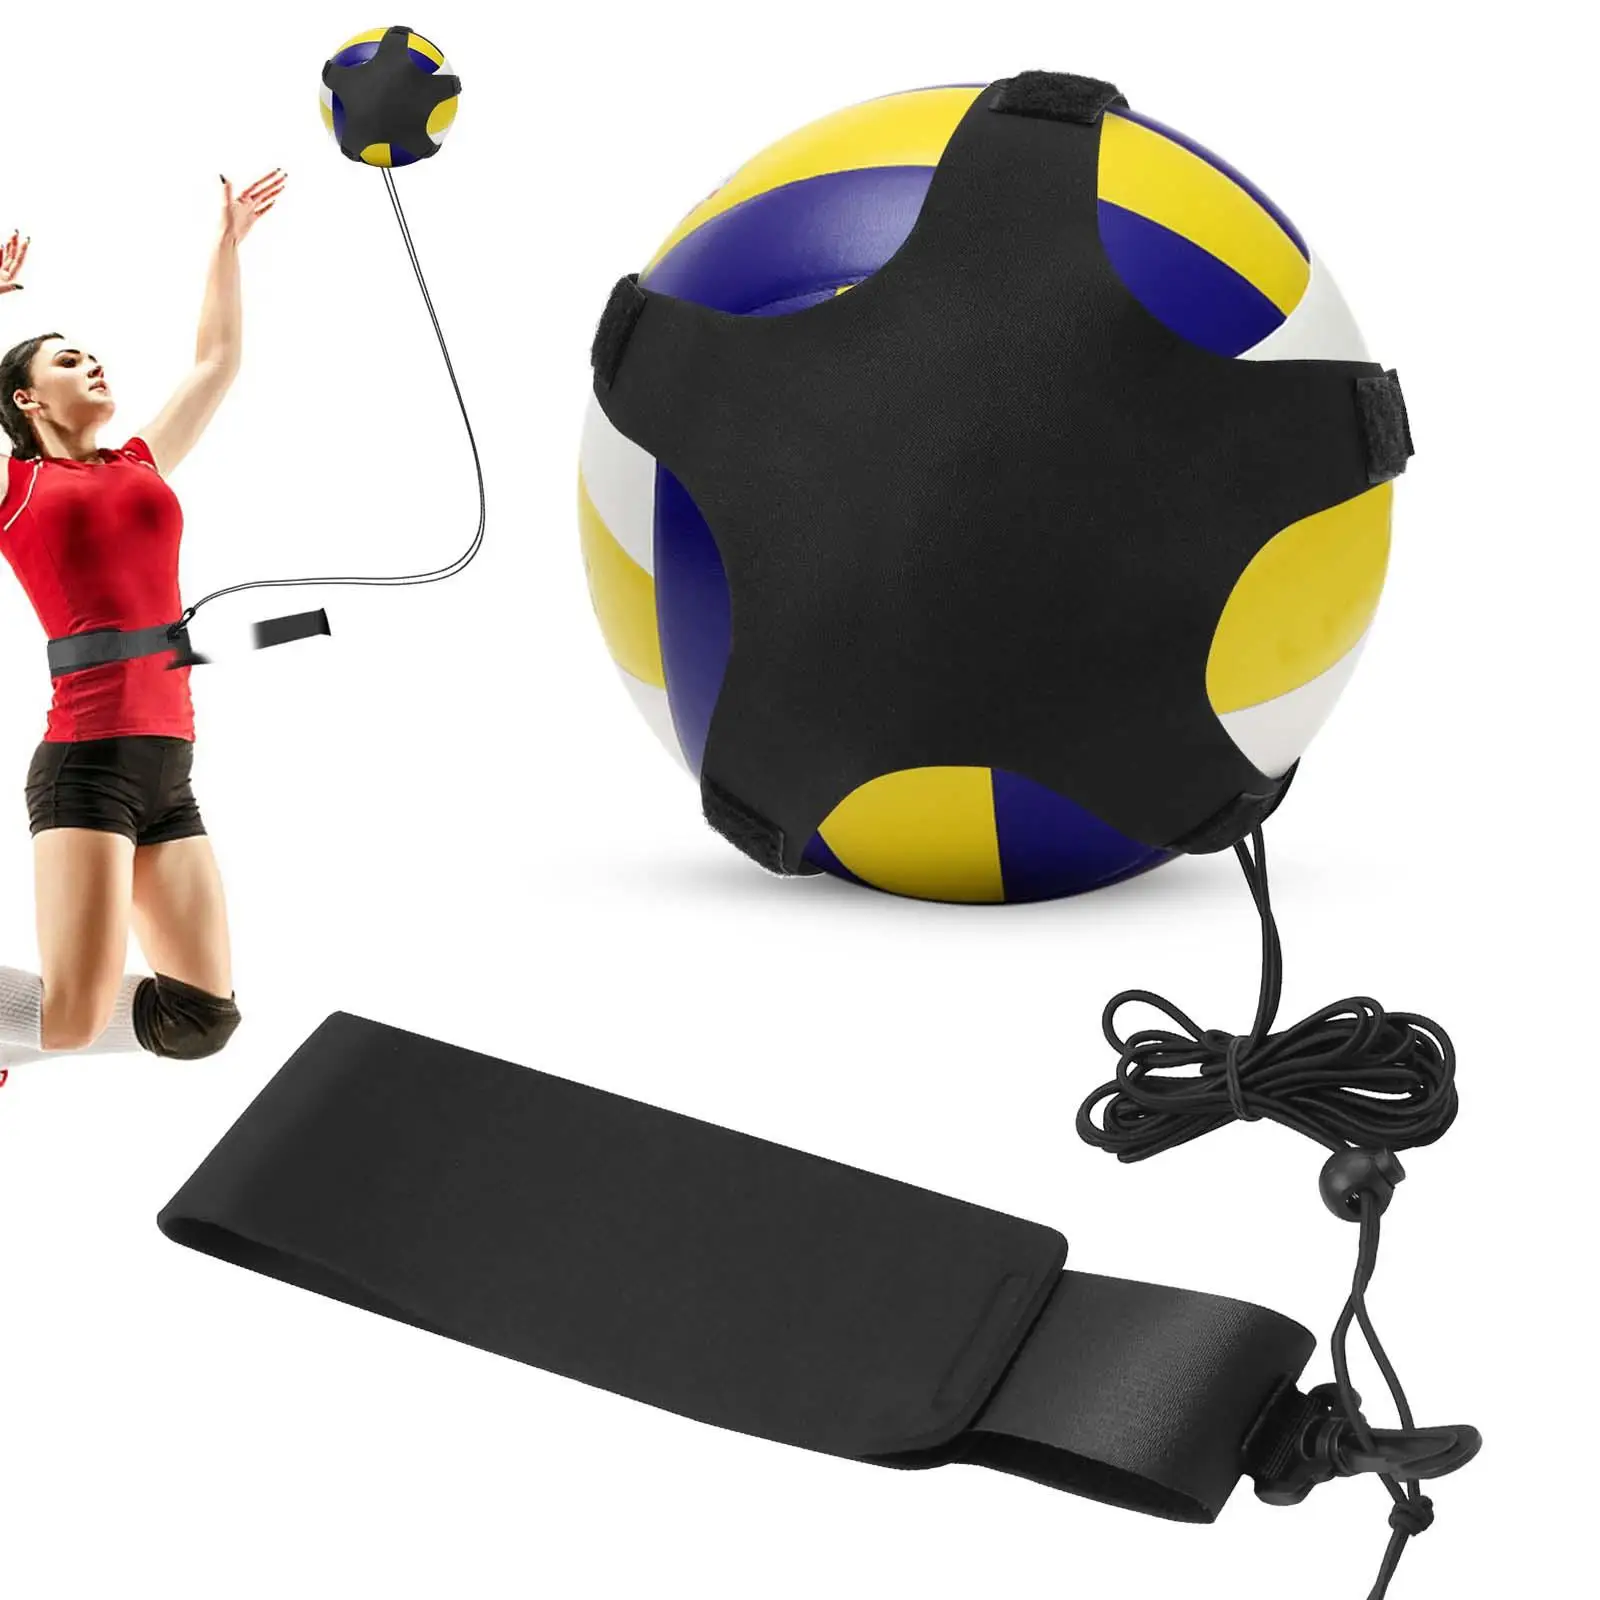 Volleyball Training Equipment Aid Elastic Cord for Beginners Serving Setting